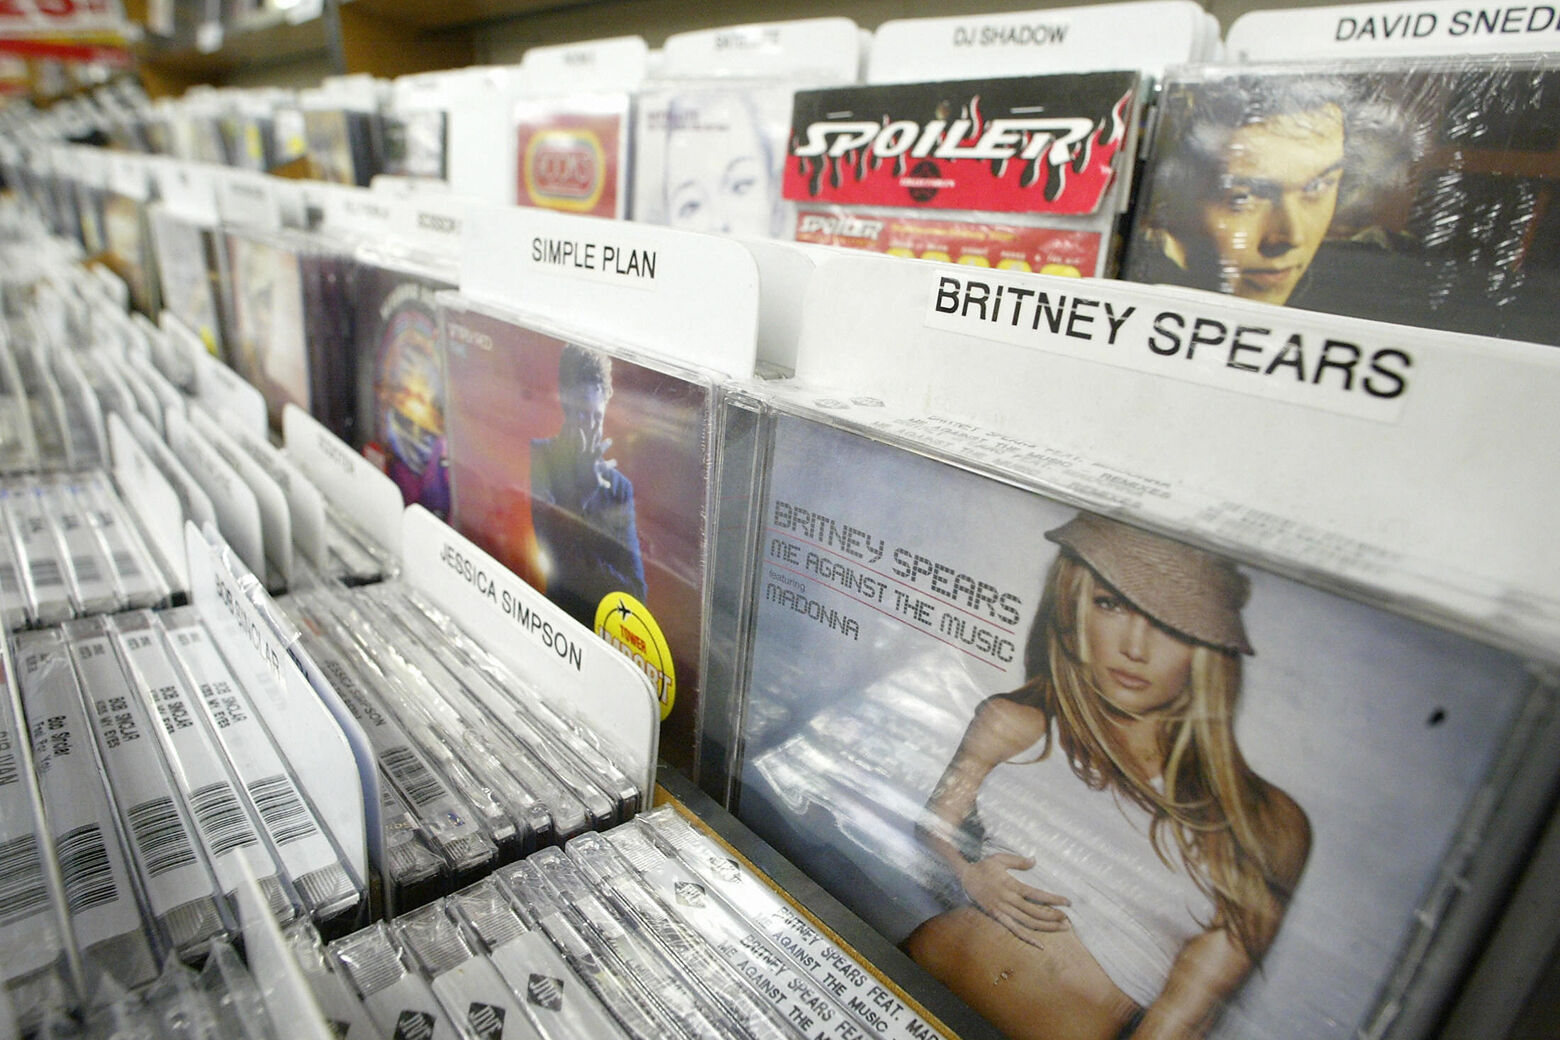 <p>HOLLYWOOD, UNITED STATES: Britney Spears and other popular music CDs for sale at a Tower Records store in Hollywood, California, 06 February 2004. Tower, the pioneering record retailer that invented the music megastore, plans to move forward on a pre-packaged Chapter 11 bankruptcy filing next week. AFP PHOTO / ROBYN BECK (Photo credit should read ROBYN BECK/AFP via Getty Images)</p>
